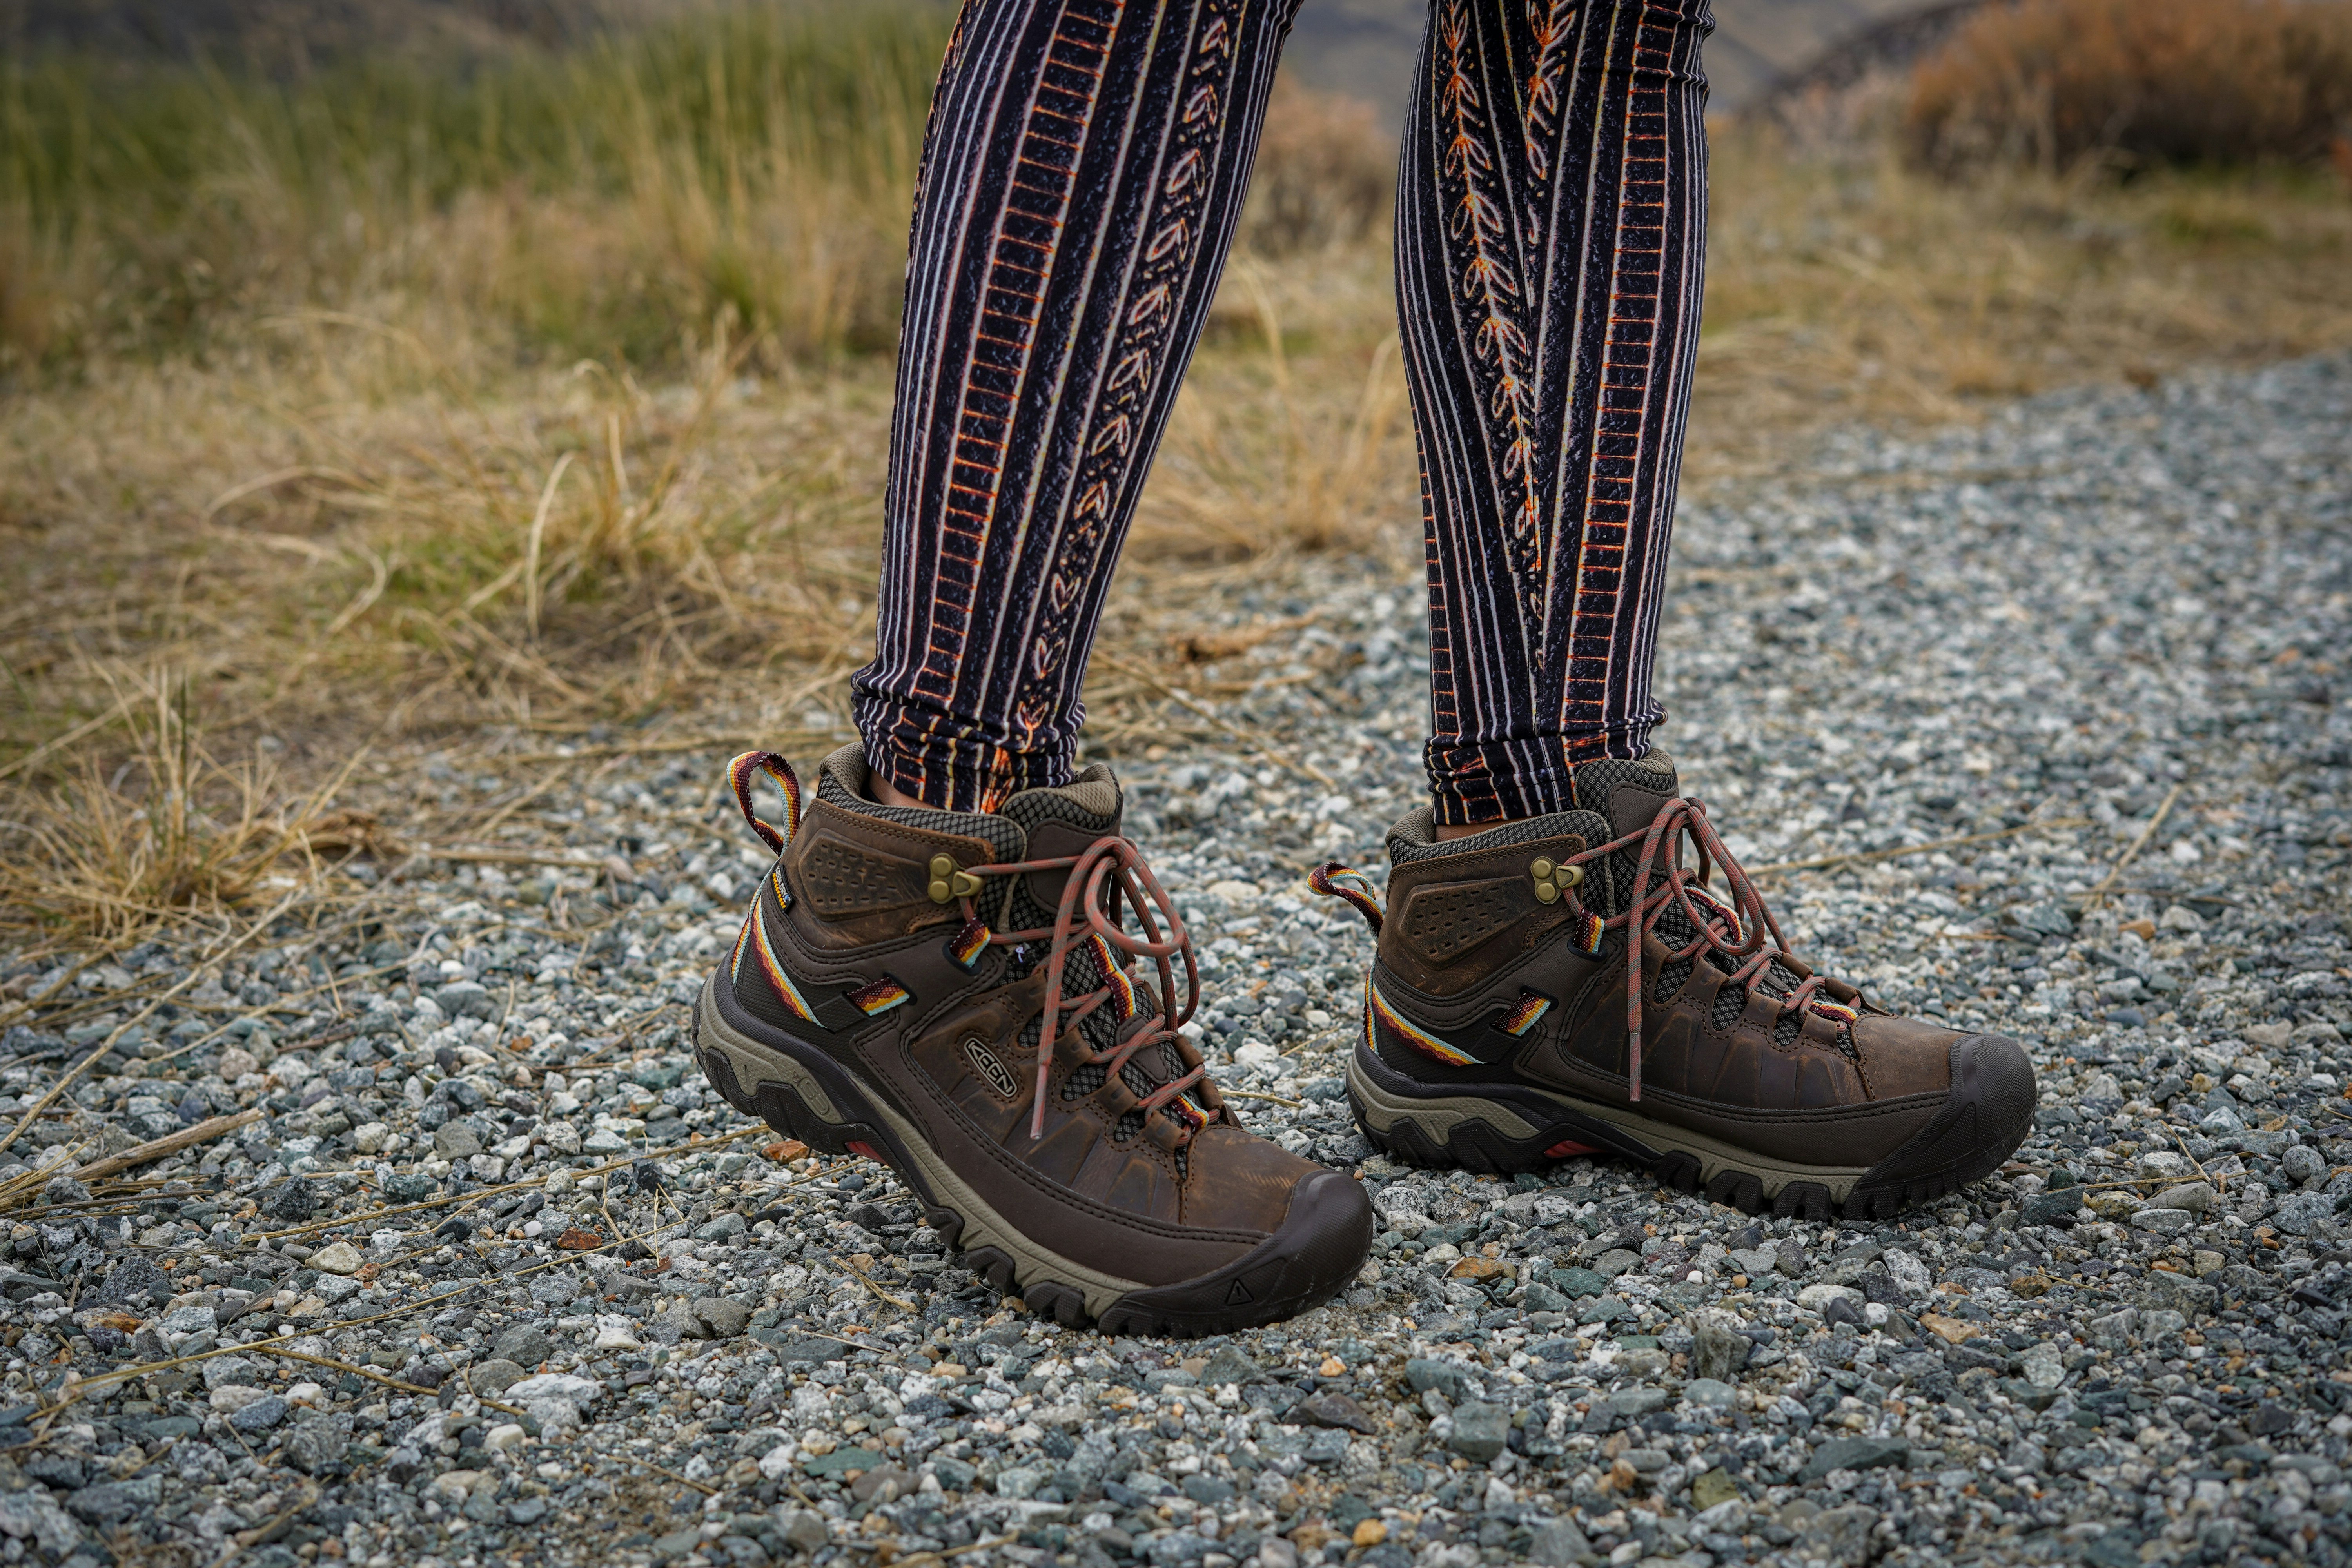 person wearing black leather hiking boots